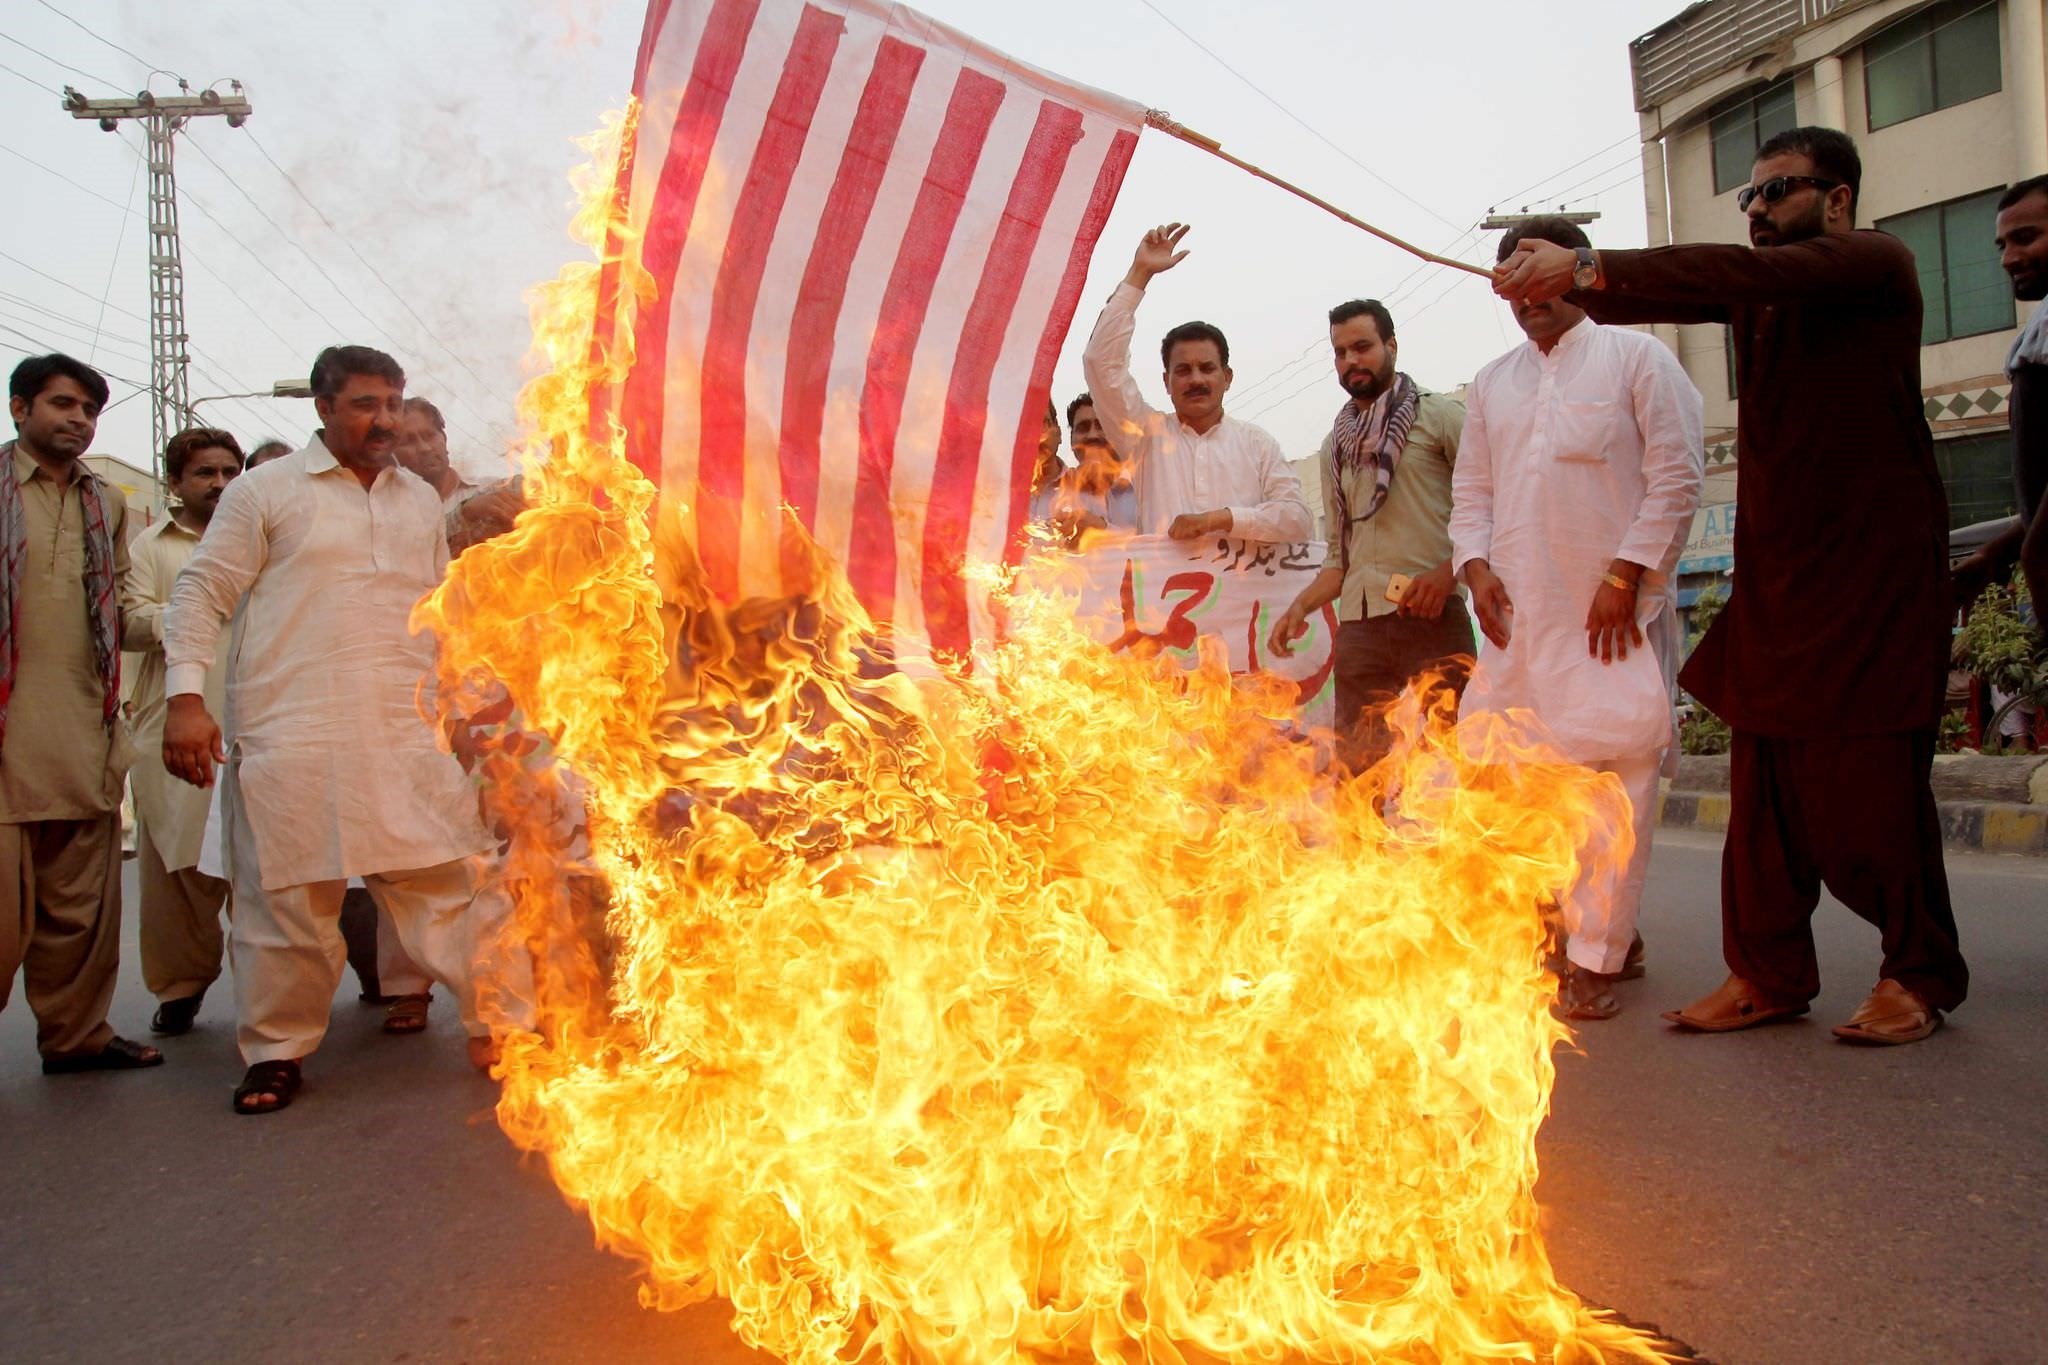 A Pakistani demonstrator holds a burning US flag as others shout slogans during a protest in Multan on May 24, 2016, against a US drone strike in Pakistan (AFP Photo)